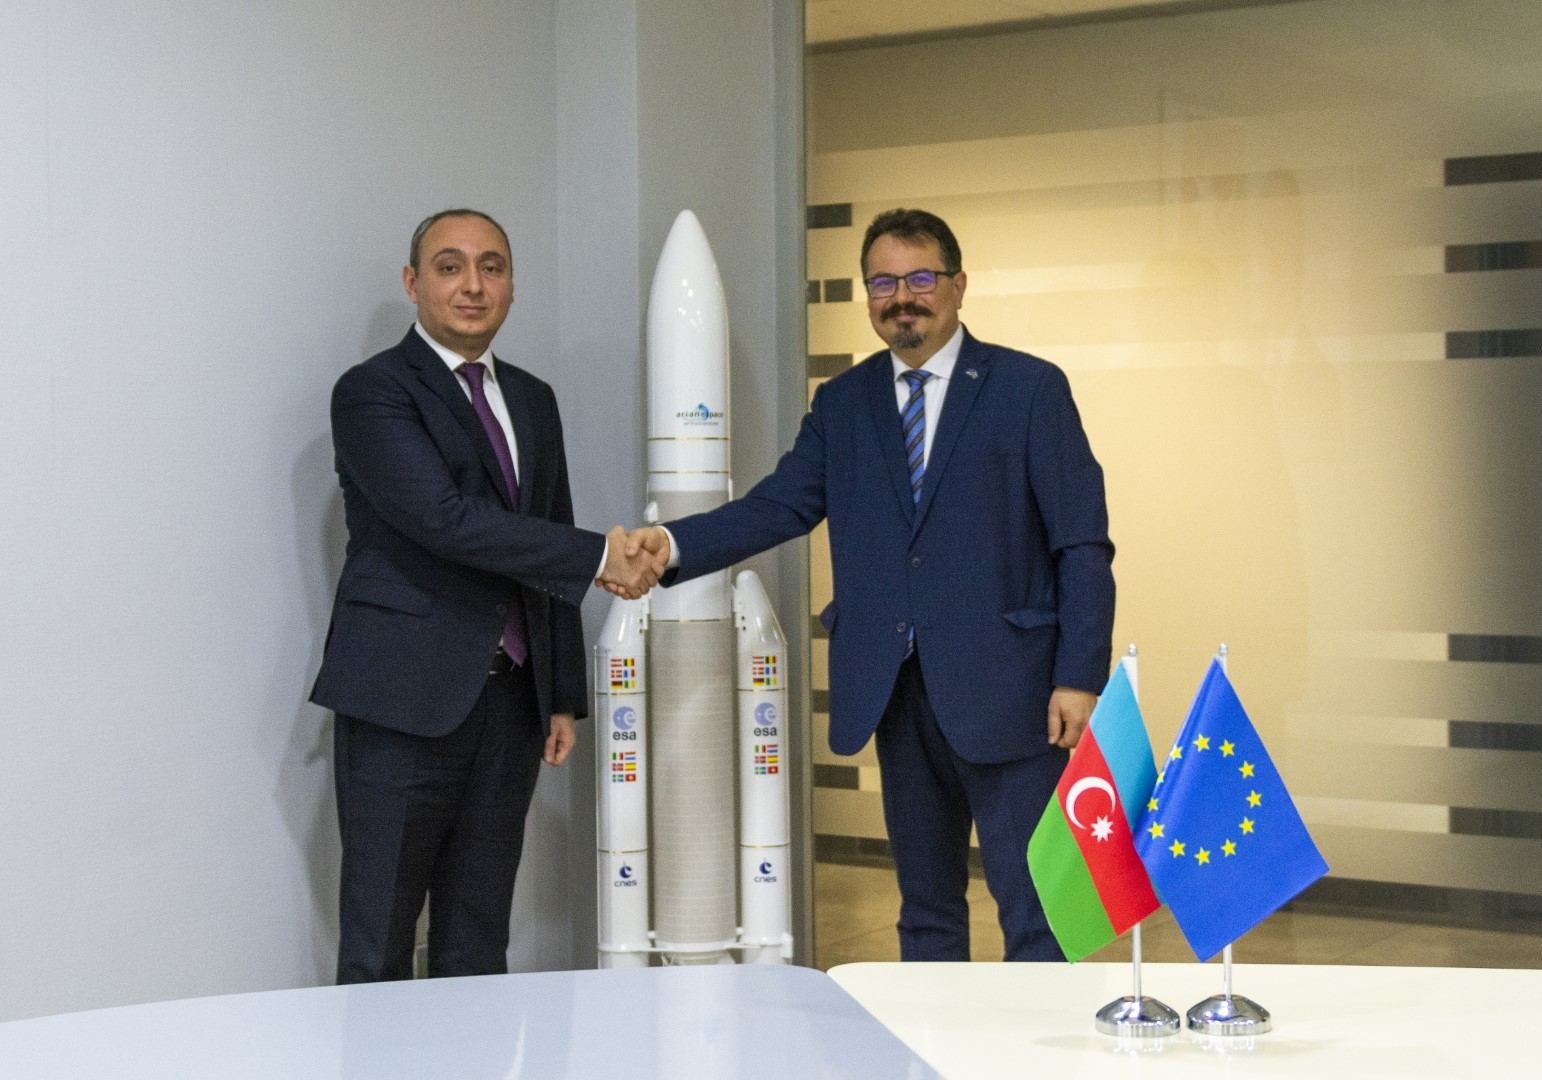 International Astronautical Congress to open great opportunities for Azerbaijan in space industry - ministry